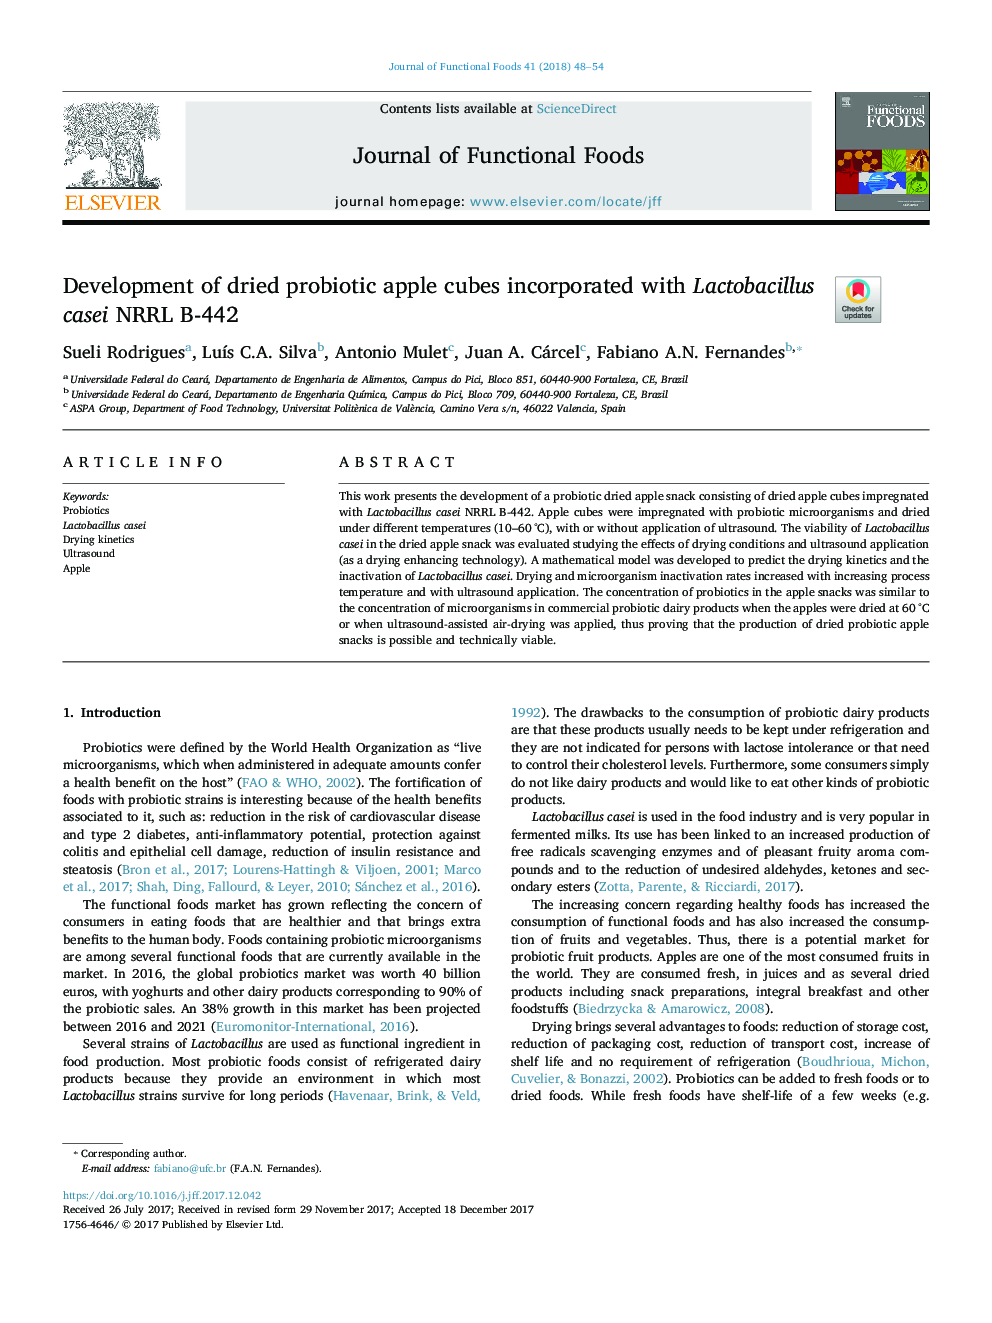 Development of dried probiotic apple cubes incorporated with Lactobacillus casei NRRL B-442